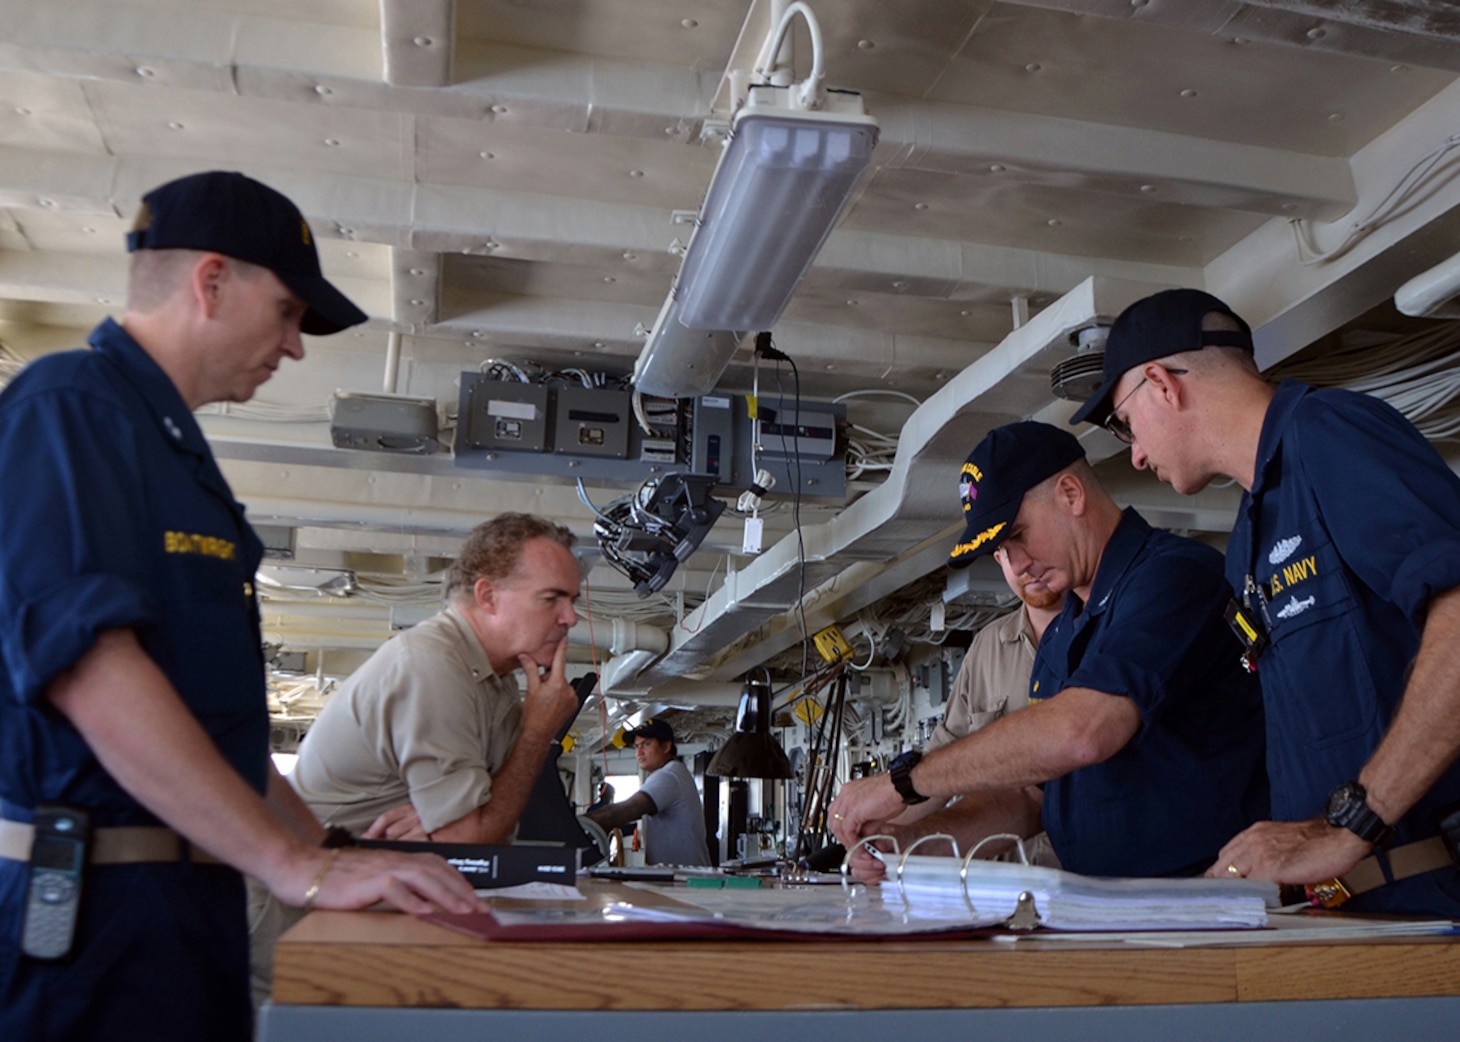 140403-N-AY759-001
PACIFIC OCEAN (April 3, 2014)  Capt. Mark Benjamin, center right, commanding officer of the submarine tender USS Frank Cable (AS 40), approves the course Frank Cable will take to rendezvous with the Military Sealift Command dry cargo and ammunition ship USNS Cesar Chavez (T-AKE 14) to conduct an underway replenishment. This is the first underway replenishment for Frank Cable in ten years and will take on 280,000 gallons of fuel from Cesar Chavez. Frank Cable, forward deployed to the island of Guam, conducts maintenance and support of submarines and surface vessels deployed in the U.S. 7th Fleet area of responsibility and is on a scheduled underway period. (U.S. Navy photo by Senior Chief Mass Communication Specialist Jason Morris/Released)
